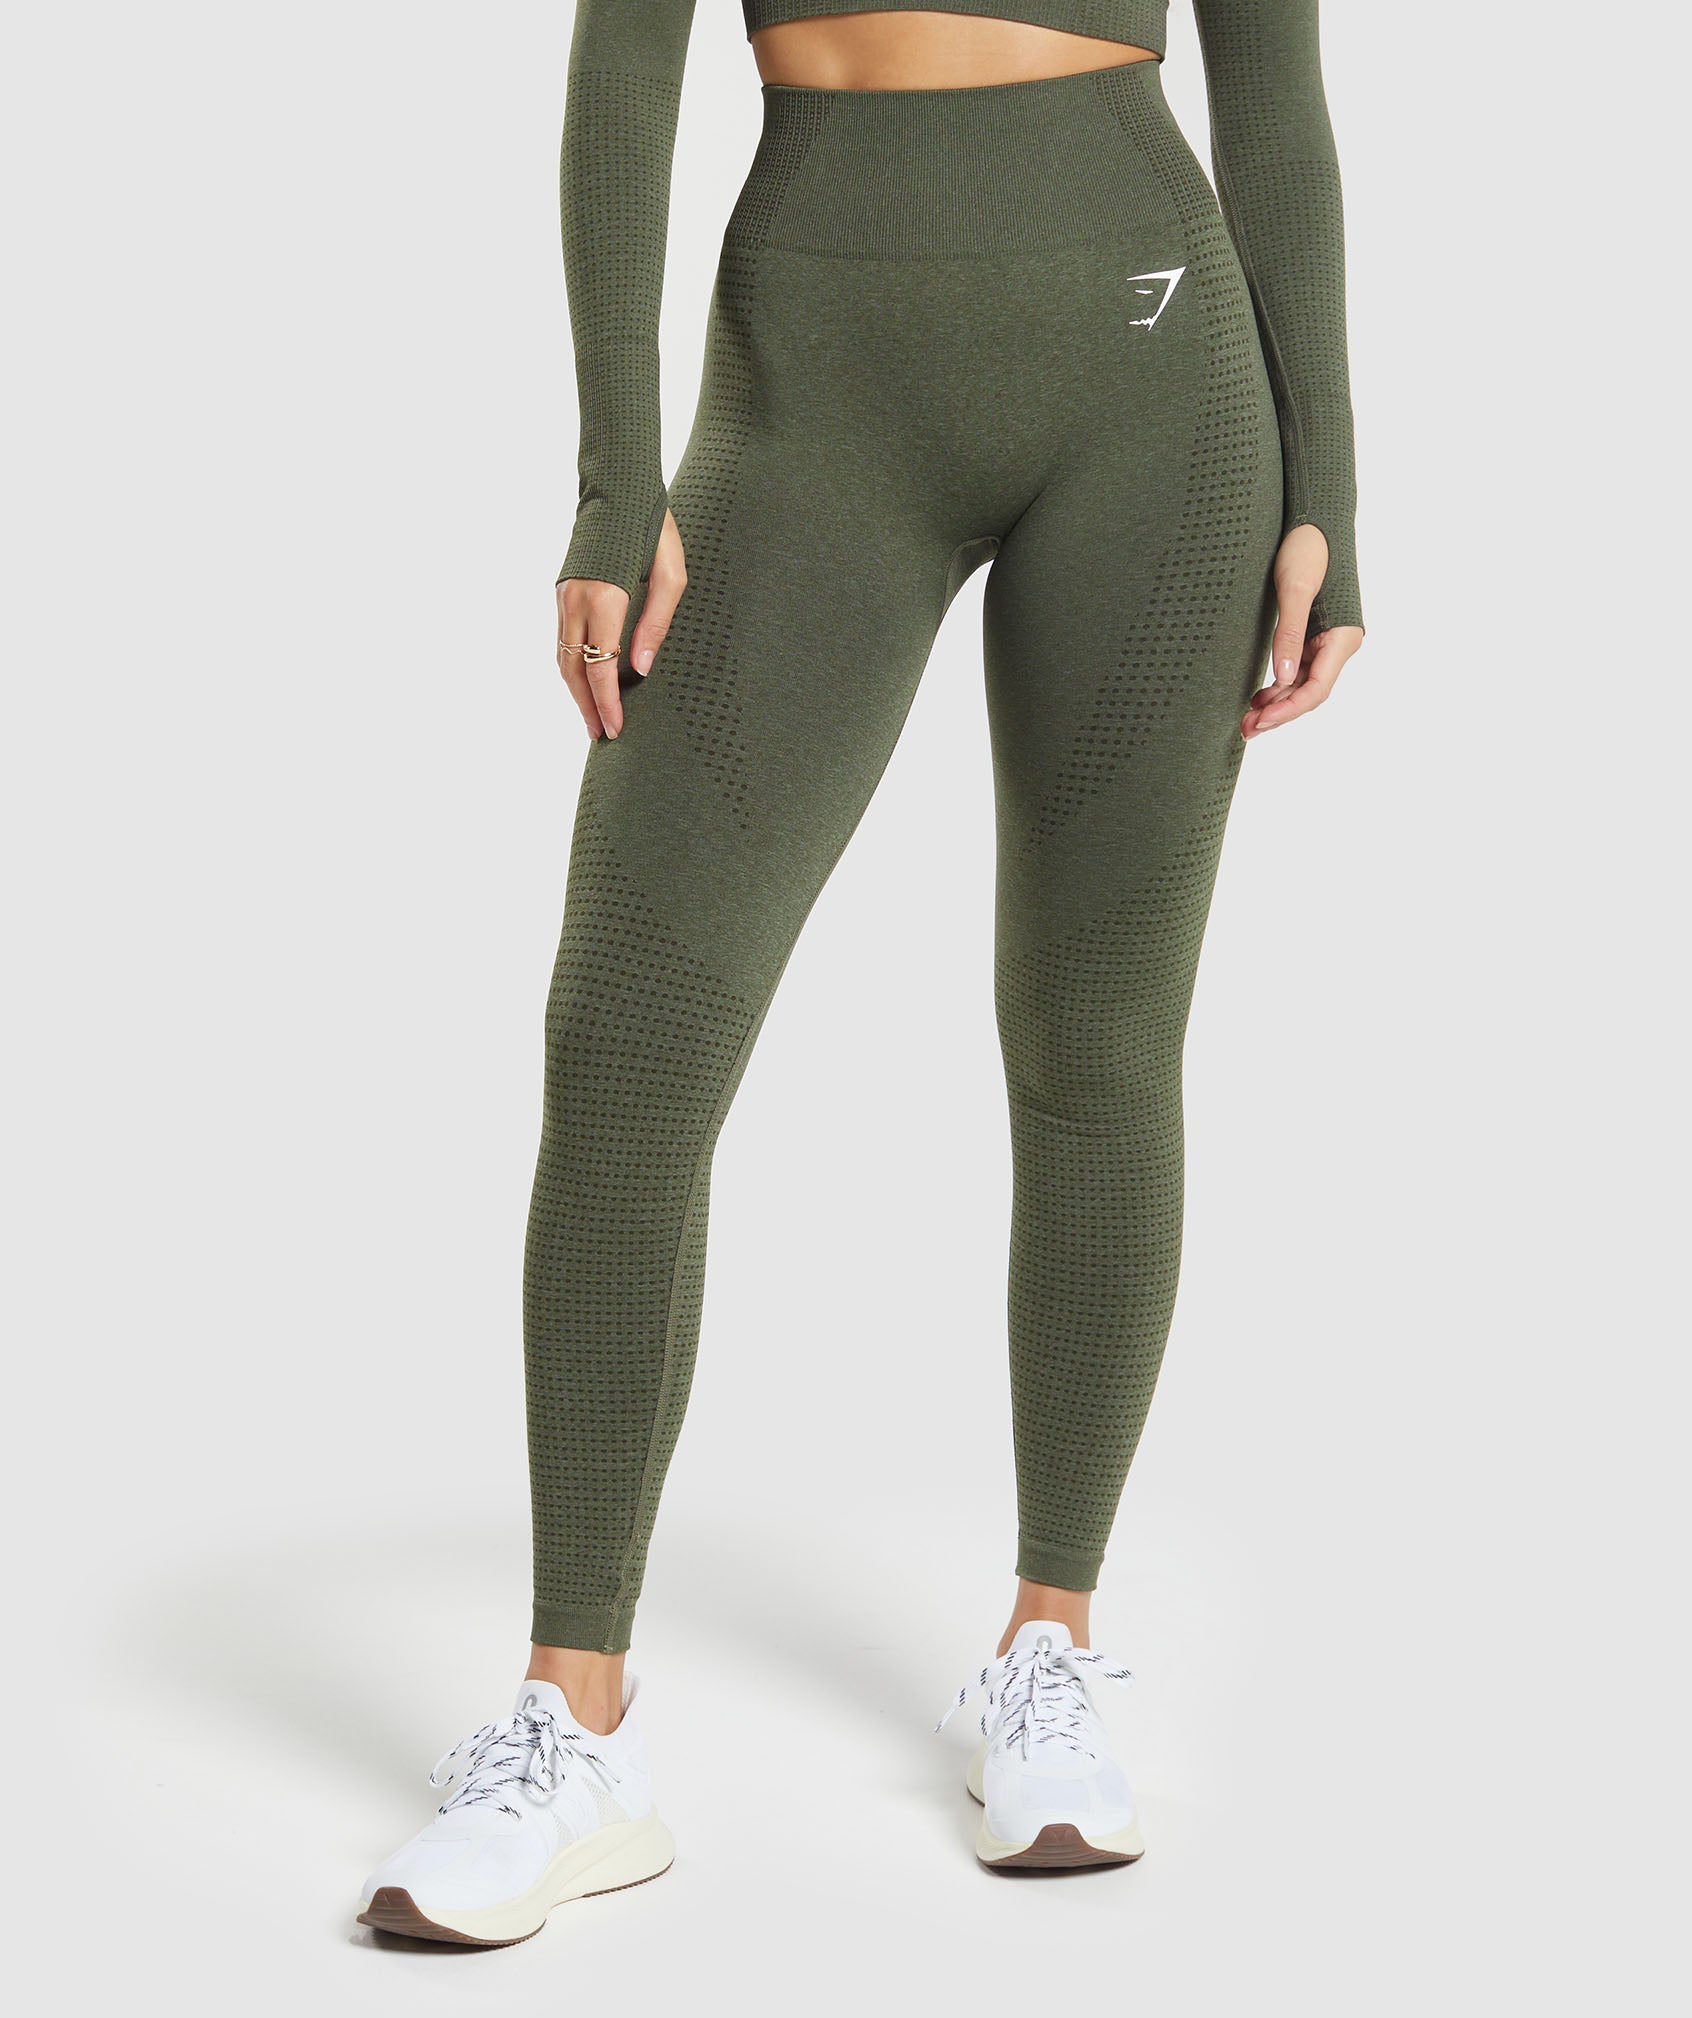 Shop Women Gym Leggings And Pants, UAE Online Shopping For Sportswear & Gym  Training Accessories